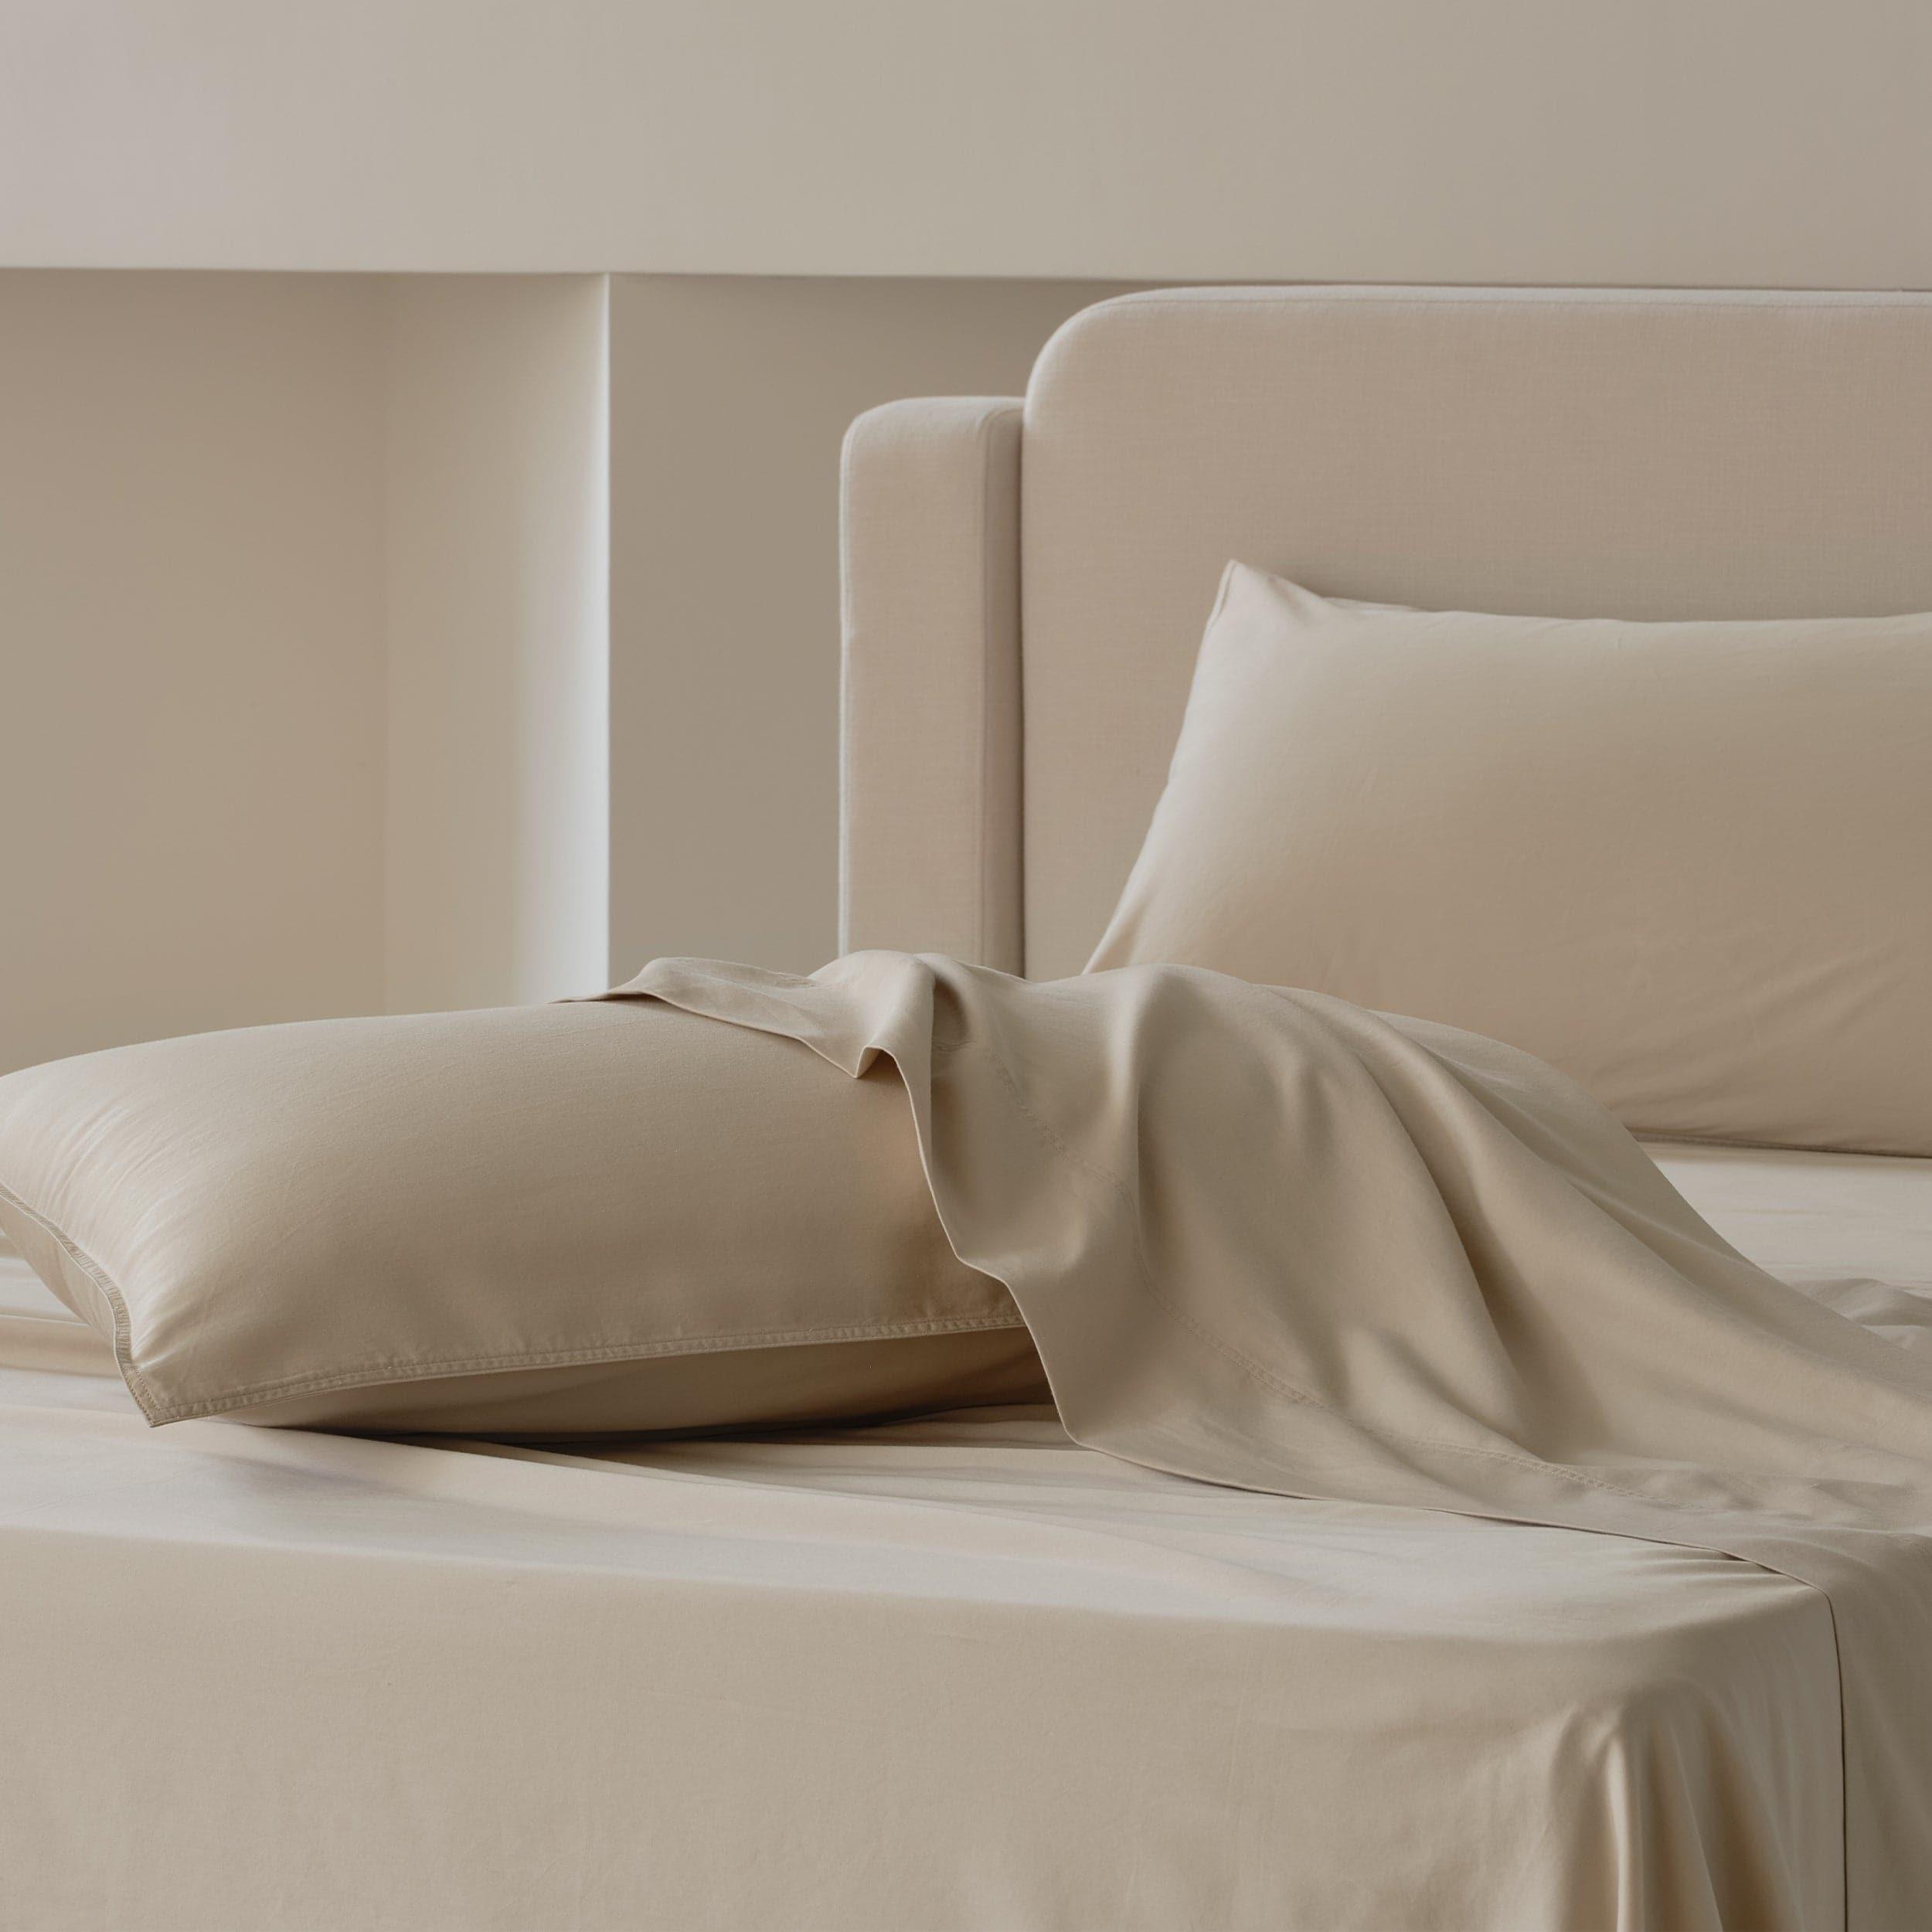 Achieve ultimate relaxation with our premium king bed sheet sets, designed for a peaceful night's sleep.